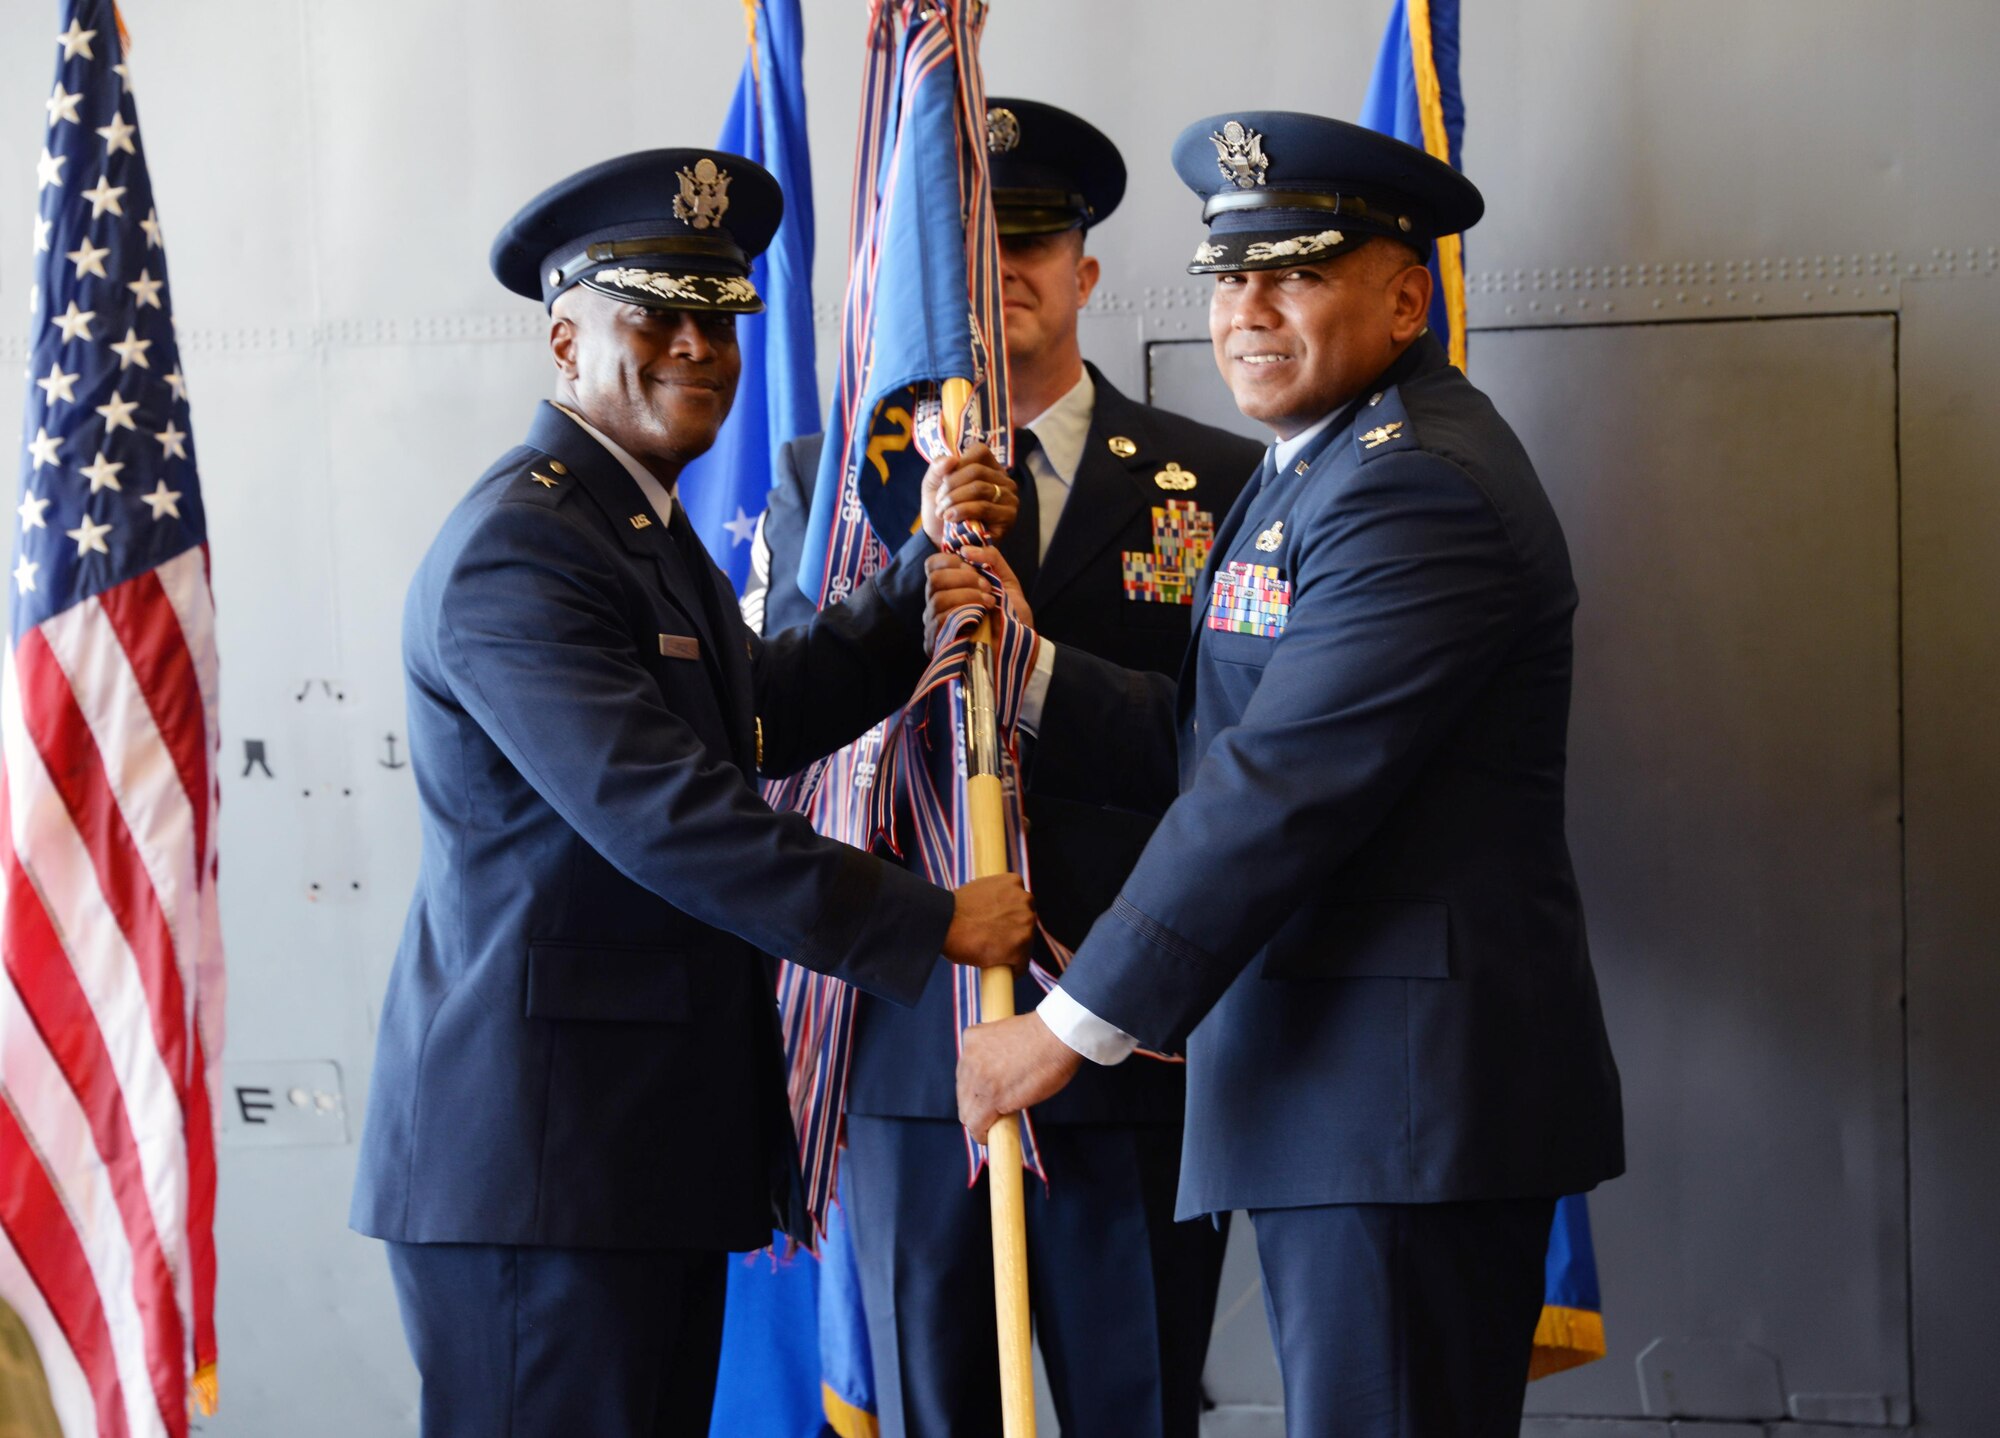 Brig. Gen. Ronald E. Jolly Sr., 82nd Training Wing commander, passes the ceremonial guidon to Col. Anthony Puente, incoming 982nd Training Group commander, during the 982nd TRG Change of Command ceremony at Sheppard Air Force Base, Texas, July 7, 2017.